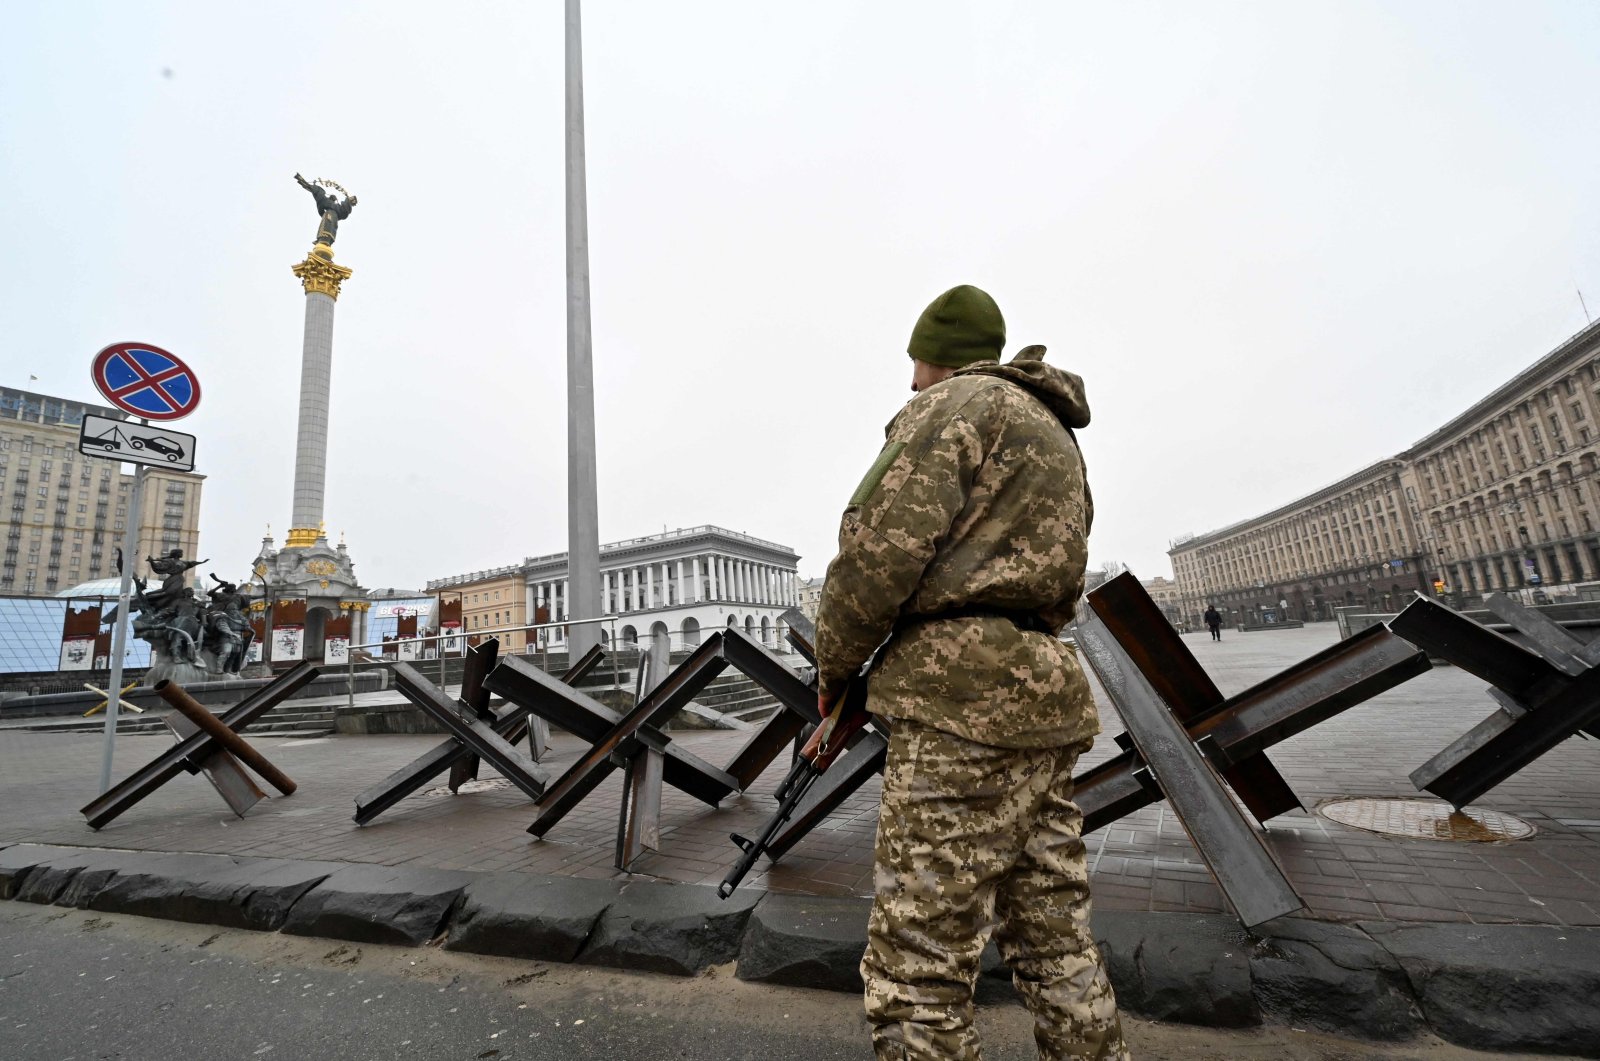 A fighter of the Ukrainian Territorial Defense Forces, the military reserve of the Ukrainian Armed Forces, stands guard near anti-tank structures at Independence Square in Kyiv, Ukraine, March 2, 2022. (AFP Photo)